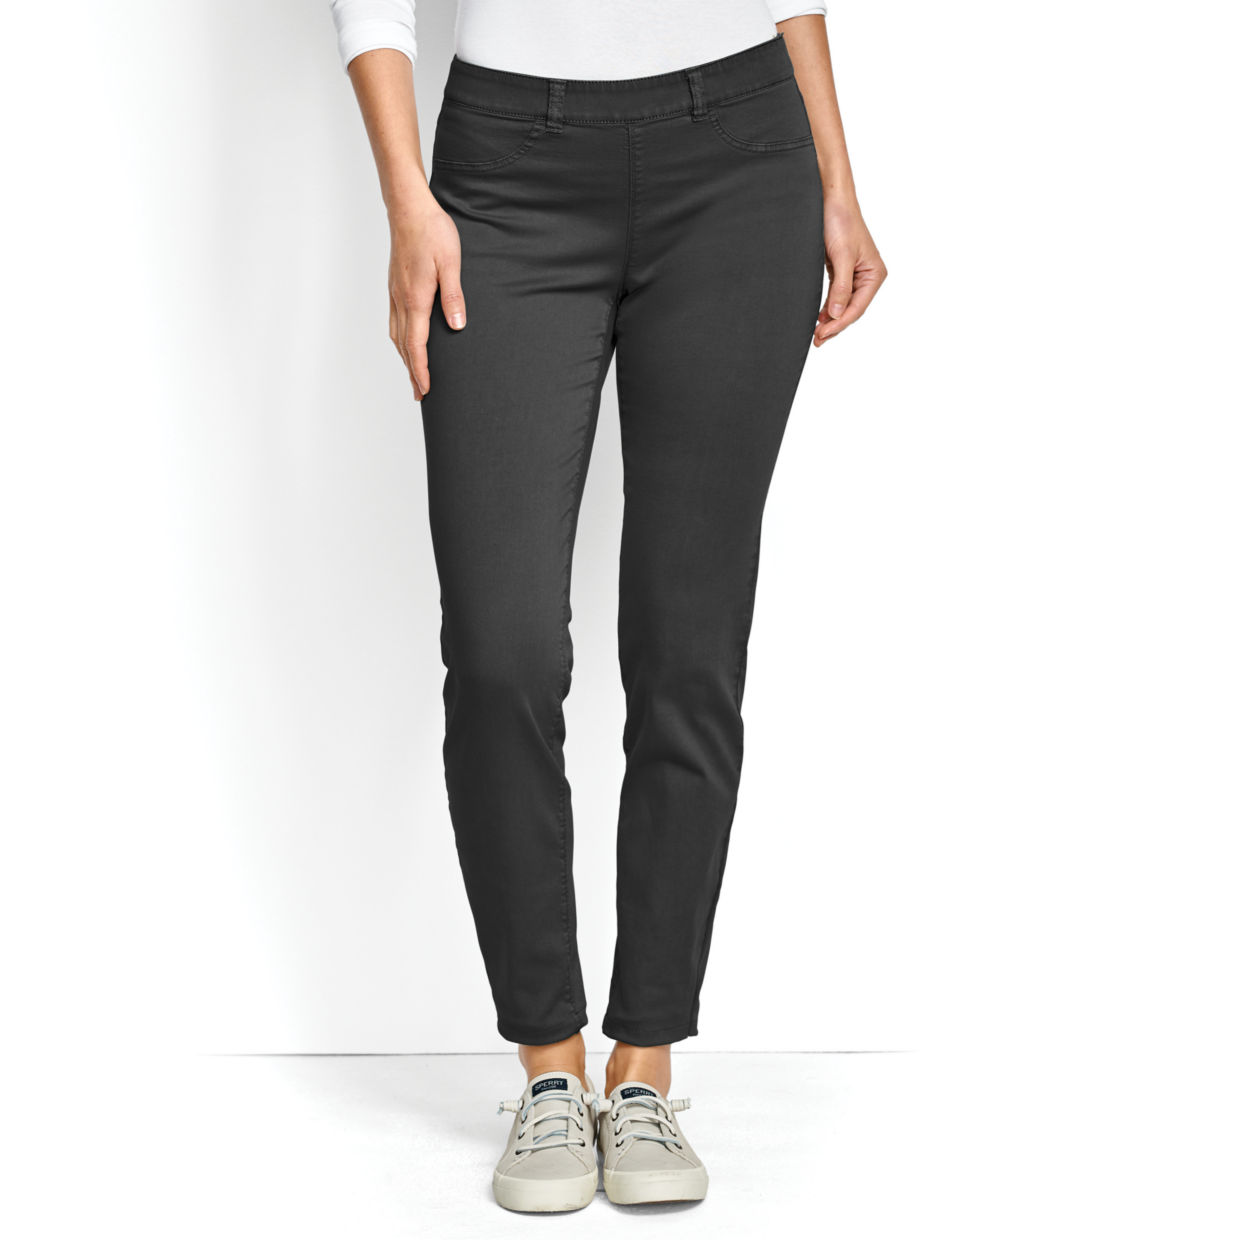 All-Day Stretch Twill Ankle Pants